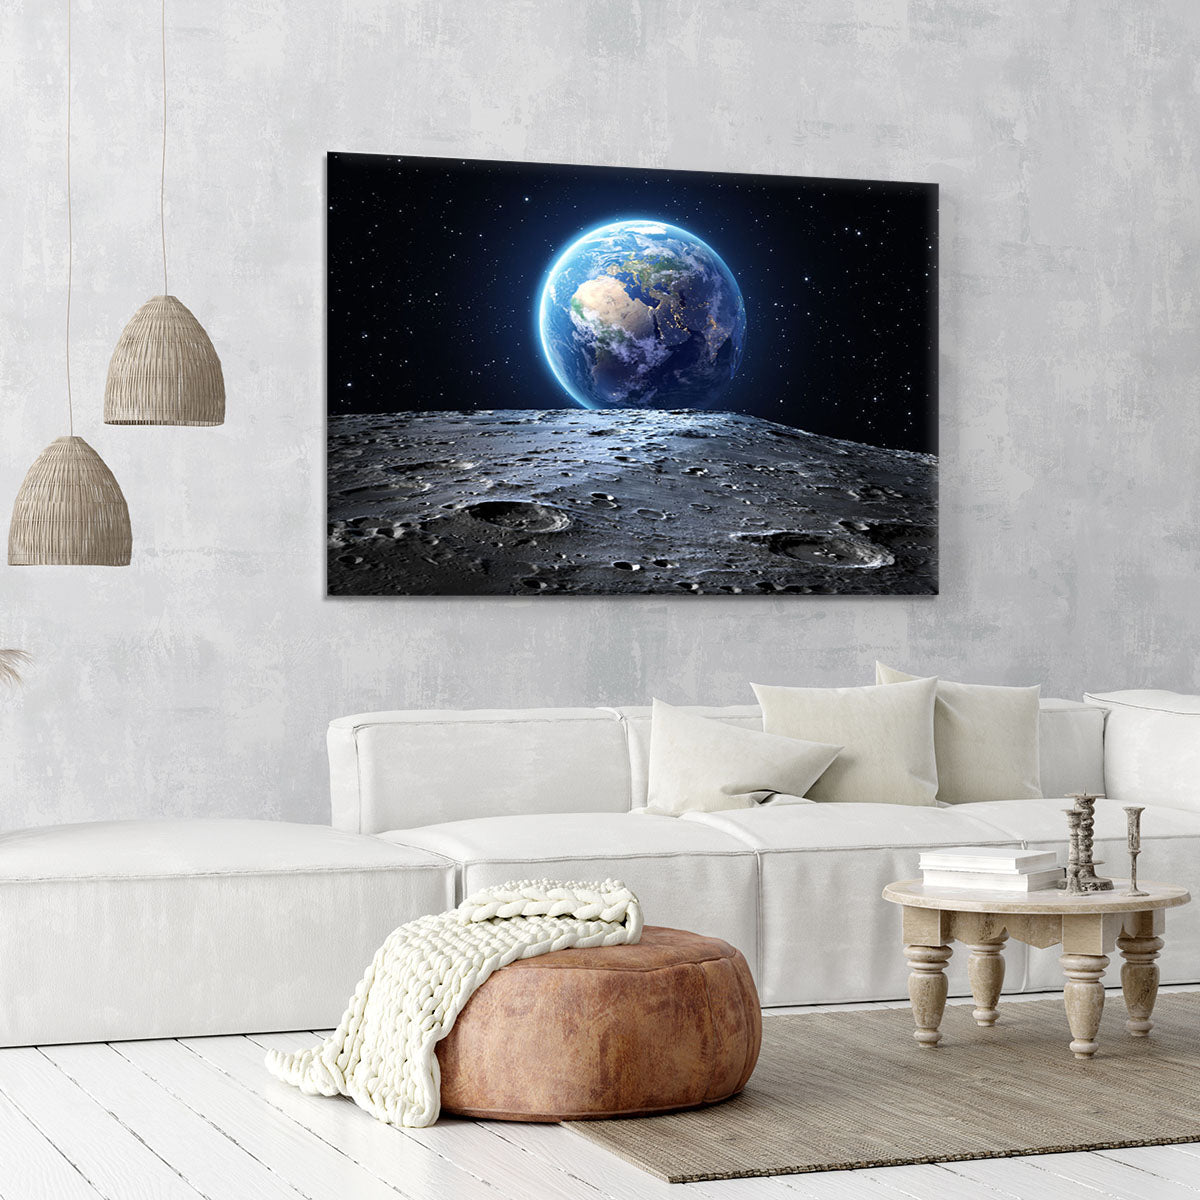 Blue earth seen from the moon surface Canvas Print or Poster - Canvas Art Rocks - 6